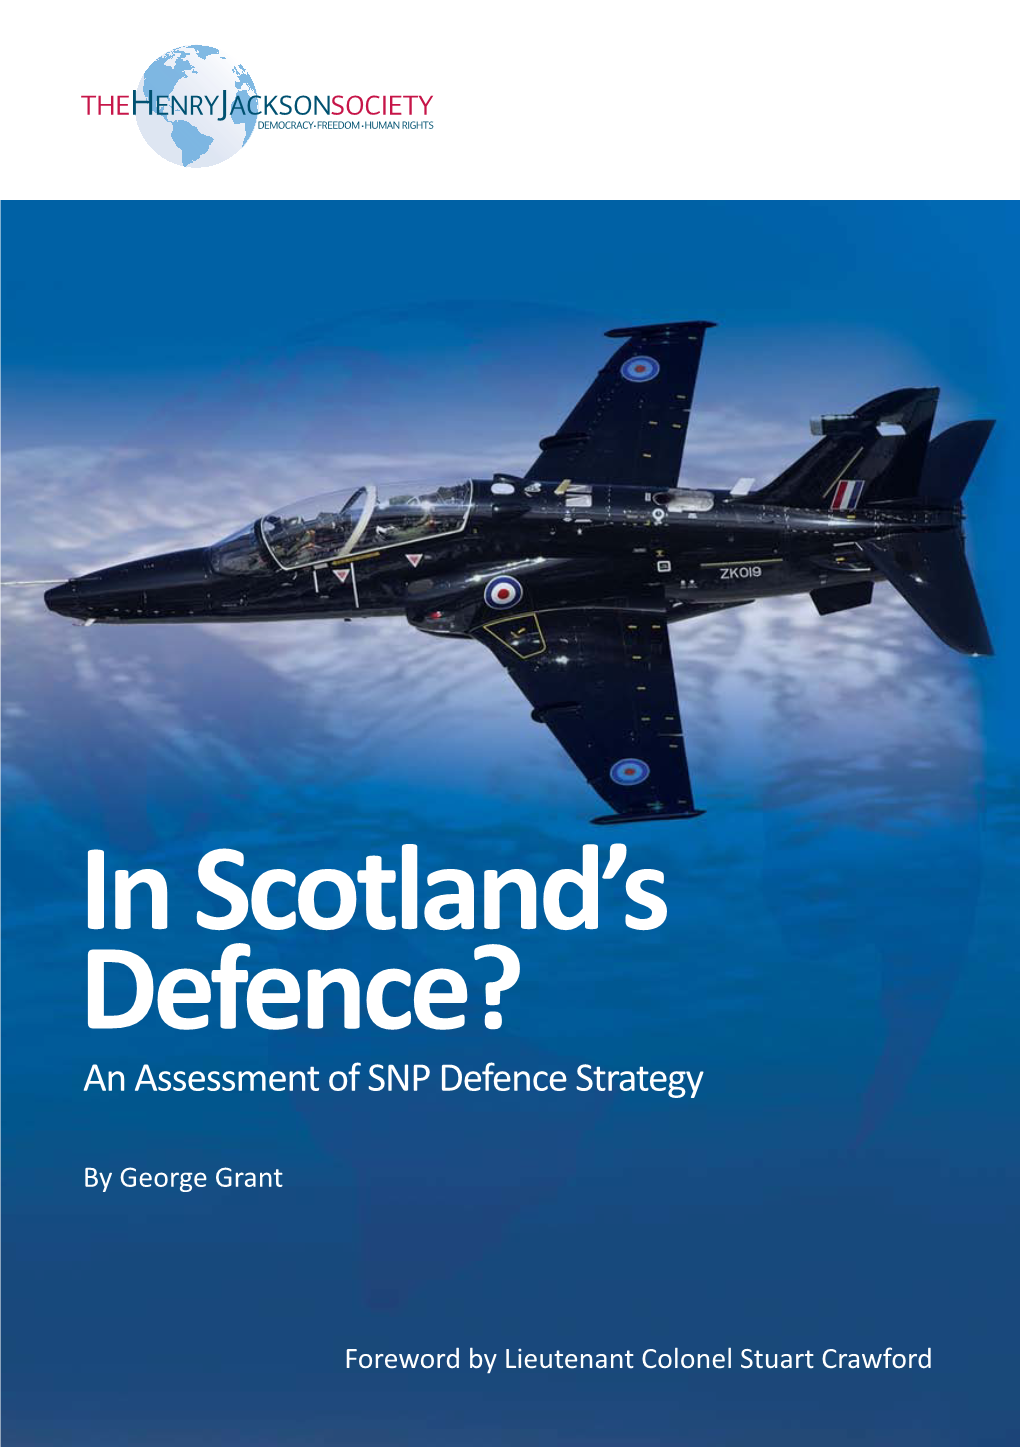 In Scotland's Defence?